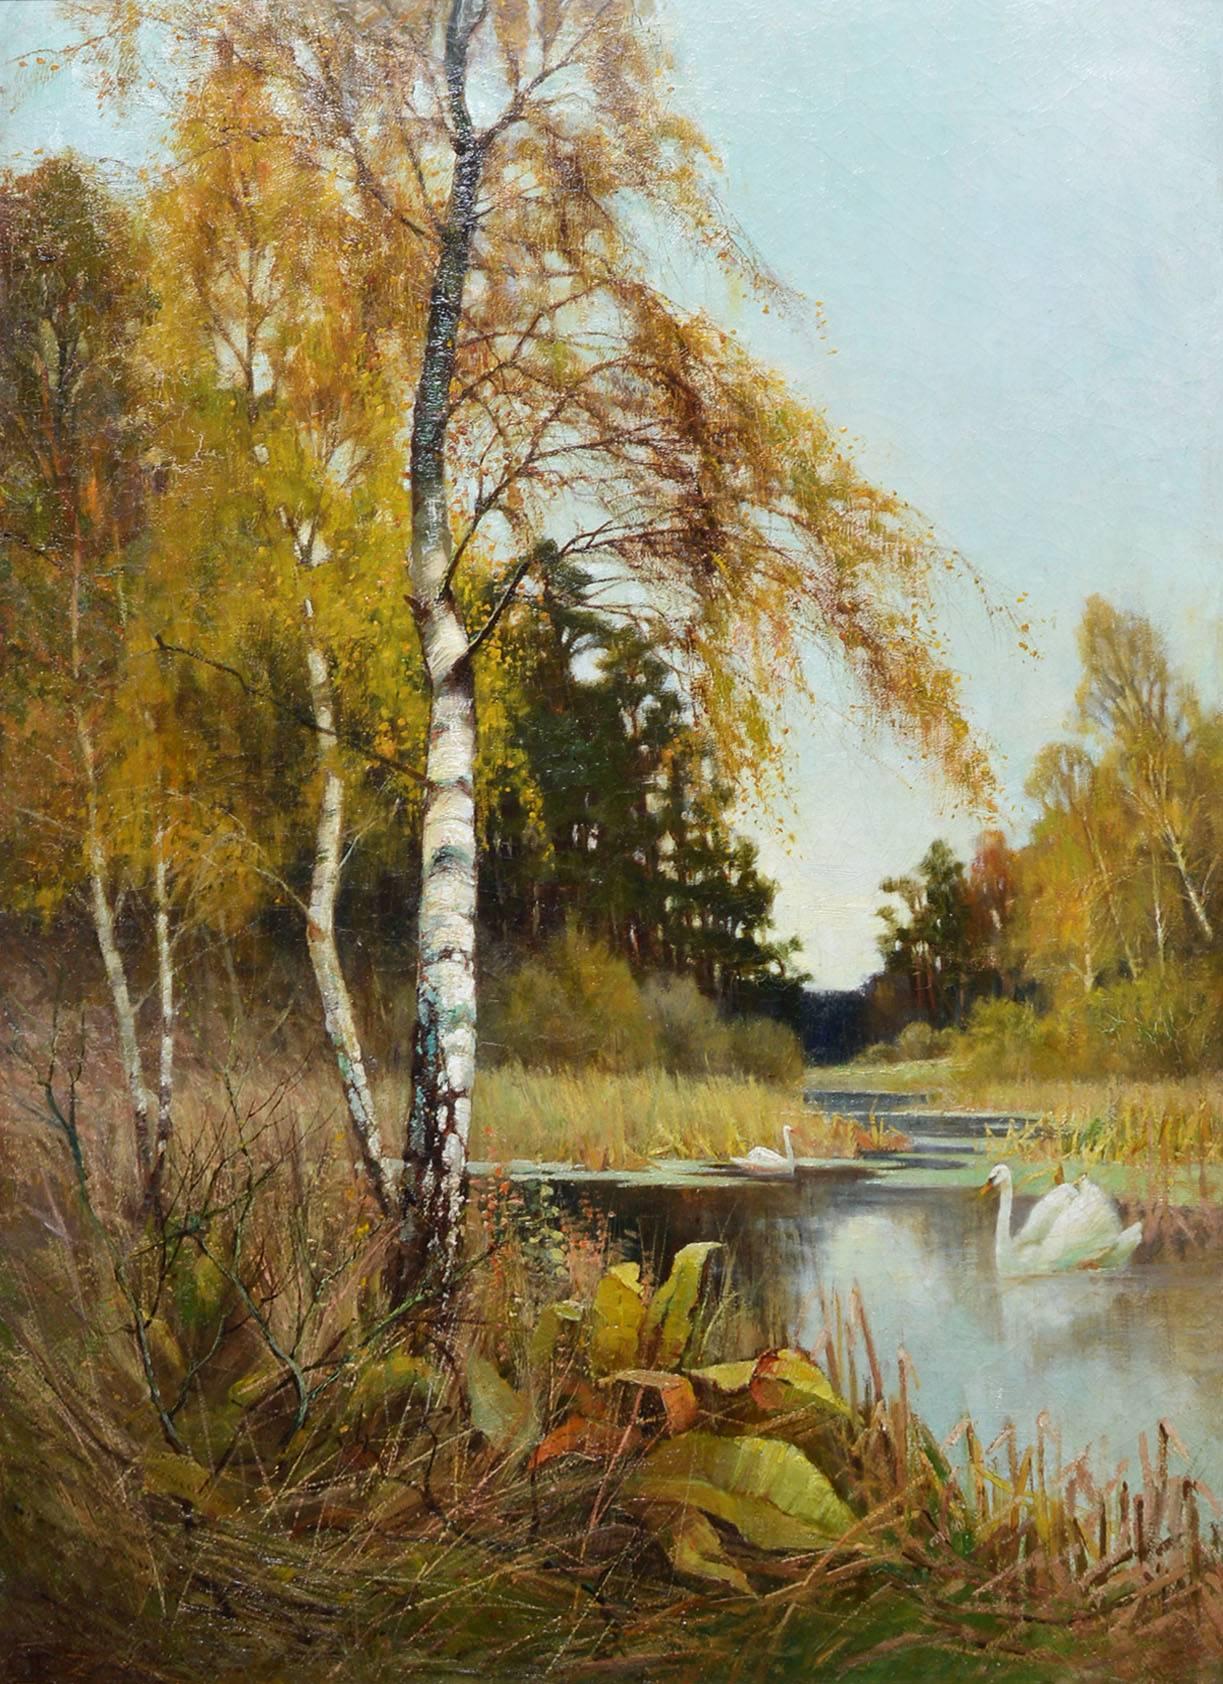 Antique River Landscape  with Swans and Birch Tree - Impressionist Painting by Unknown